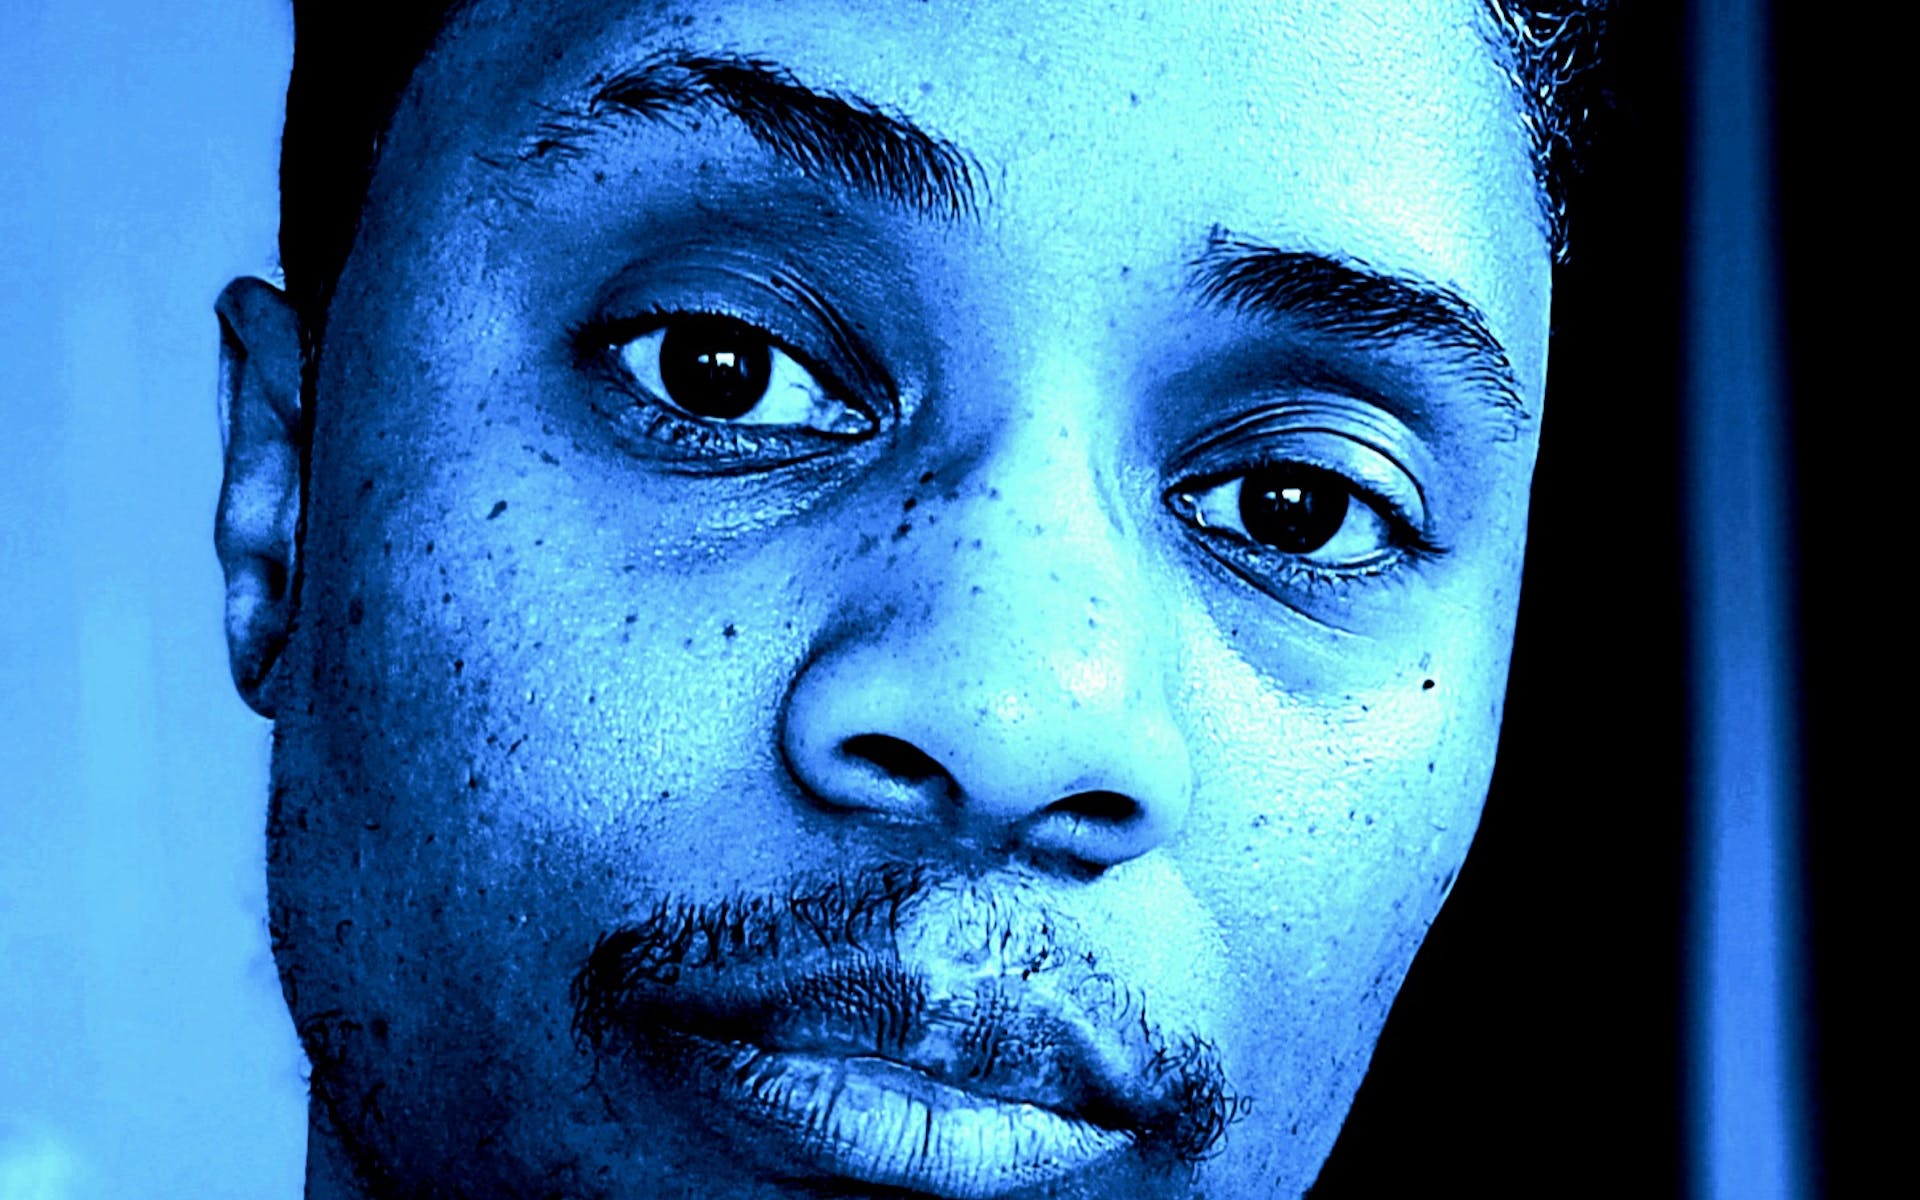 Blue-tinted image of person with short hair, medium skin, and a mustache looking into the camera.